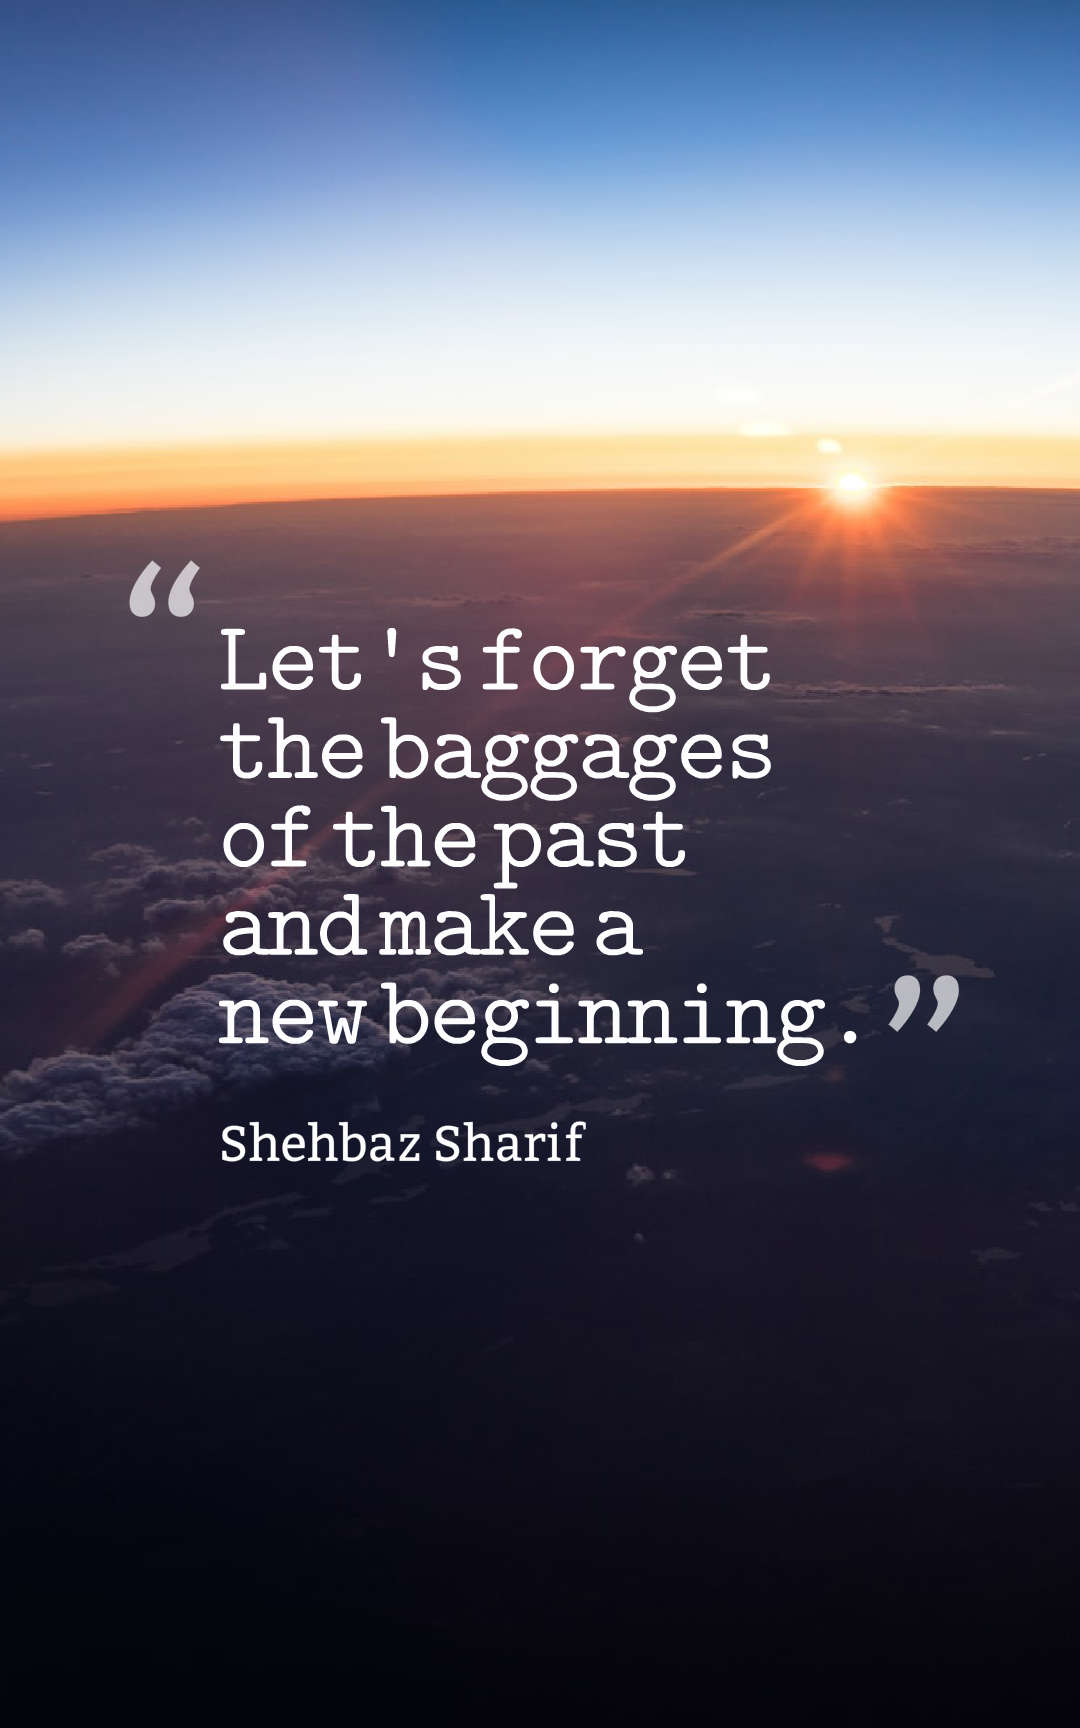 Lets forget the baggages of the past and make a new beginning.